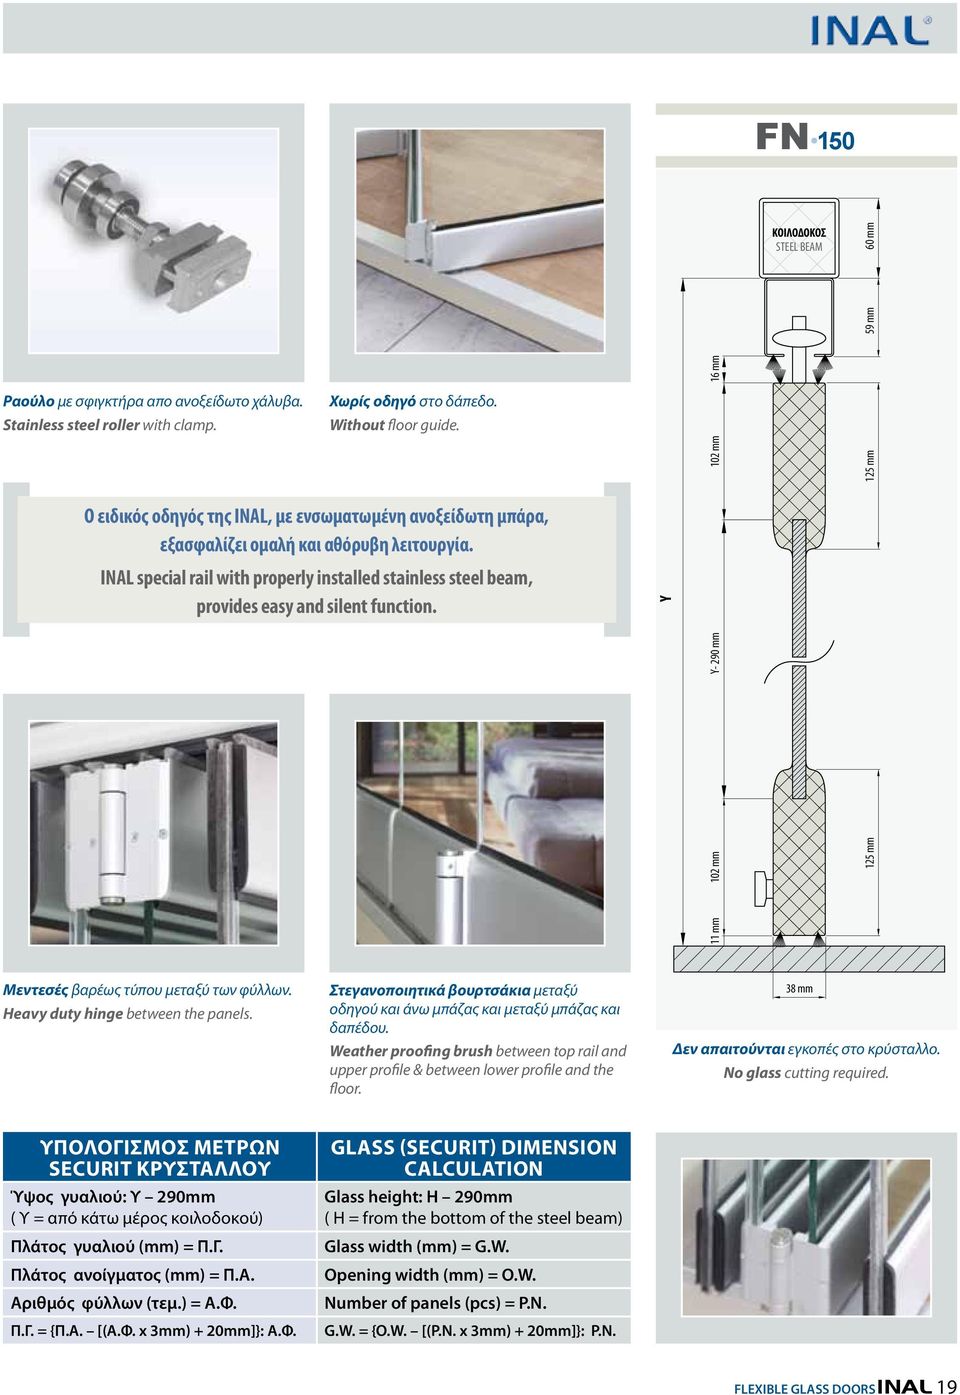 INAL special rail with properly installed stainless steel beam, provides easy and silent function. Y Μεντεσές βαρέως τύπου μεταξύ των φύλλων. Heavy duty hinge between the panels.